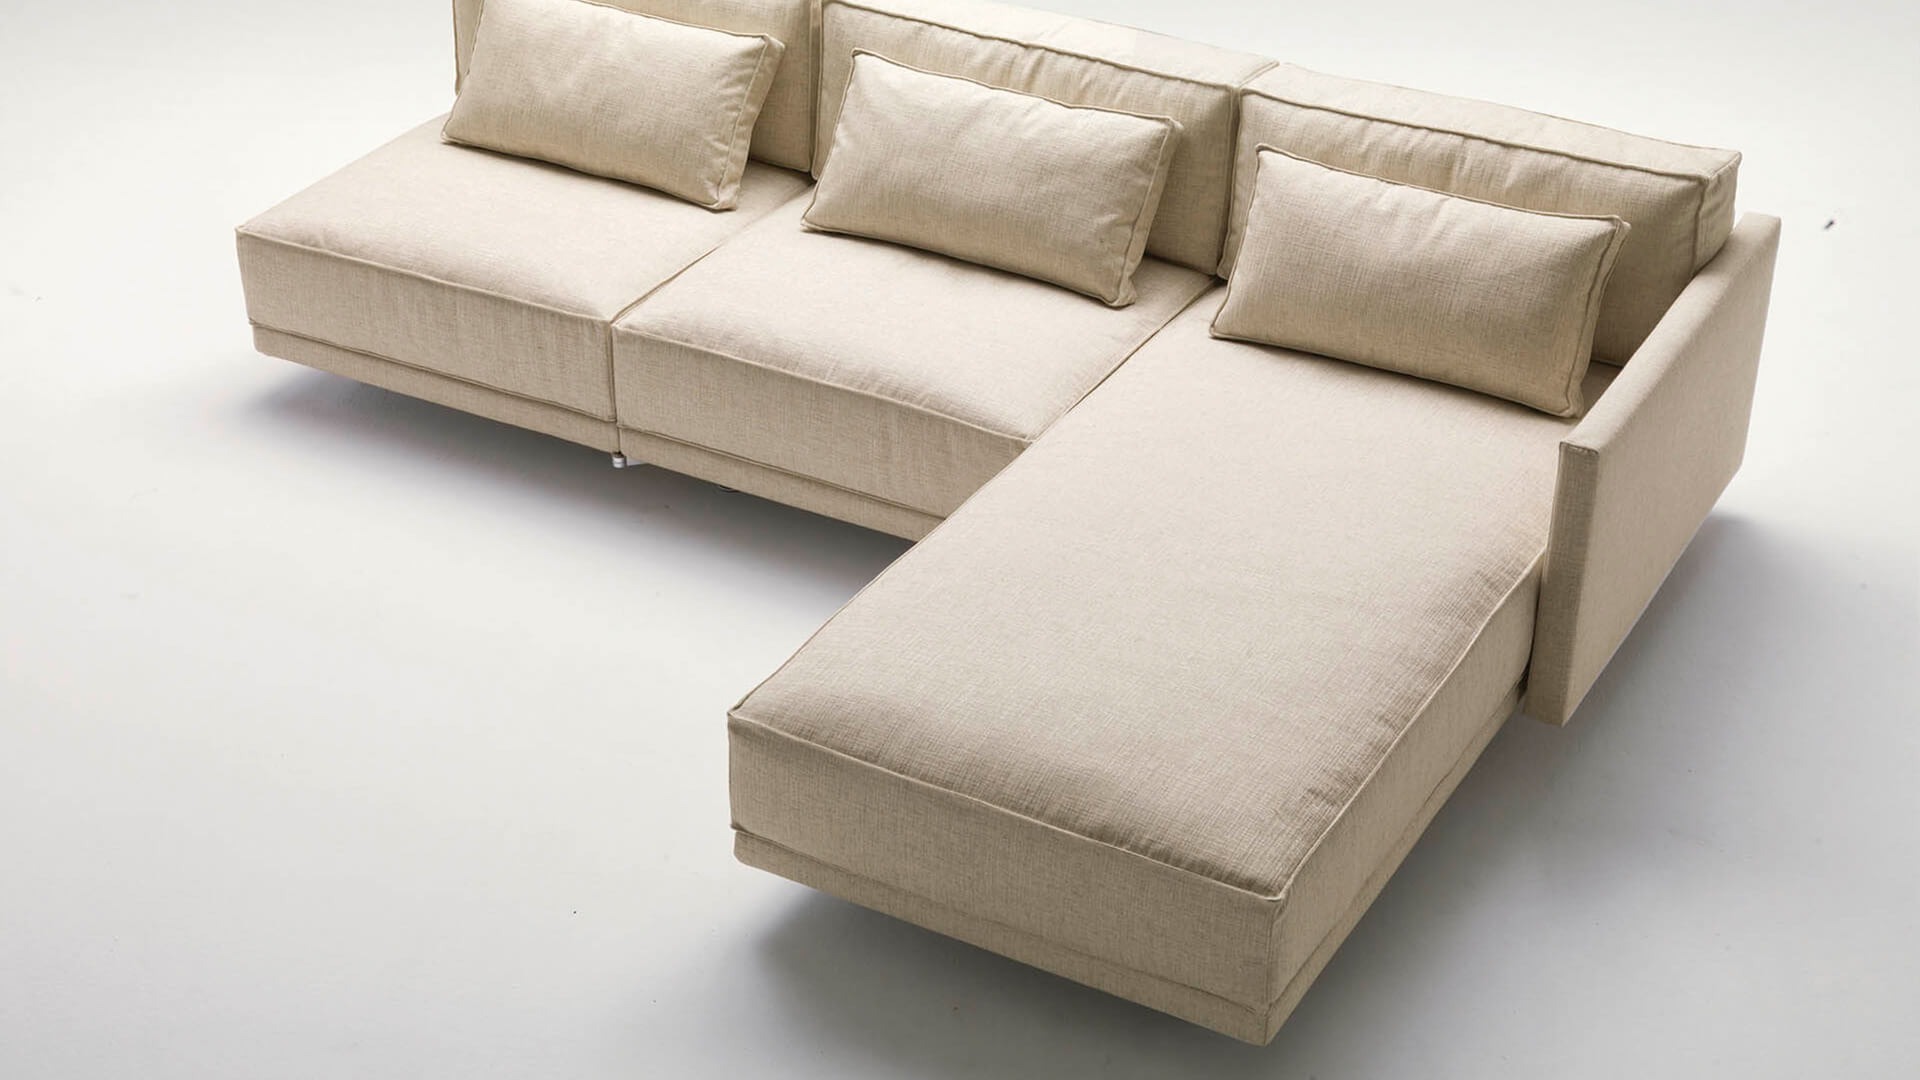 Blog IDW - The sofa bed between aesthetics and comfort